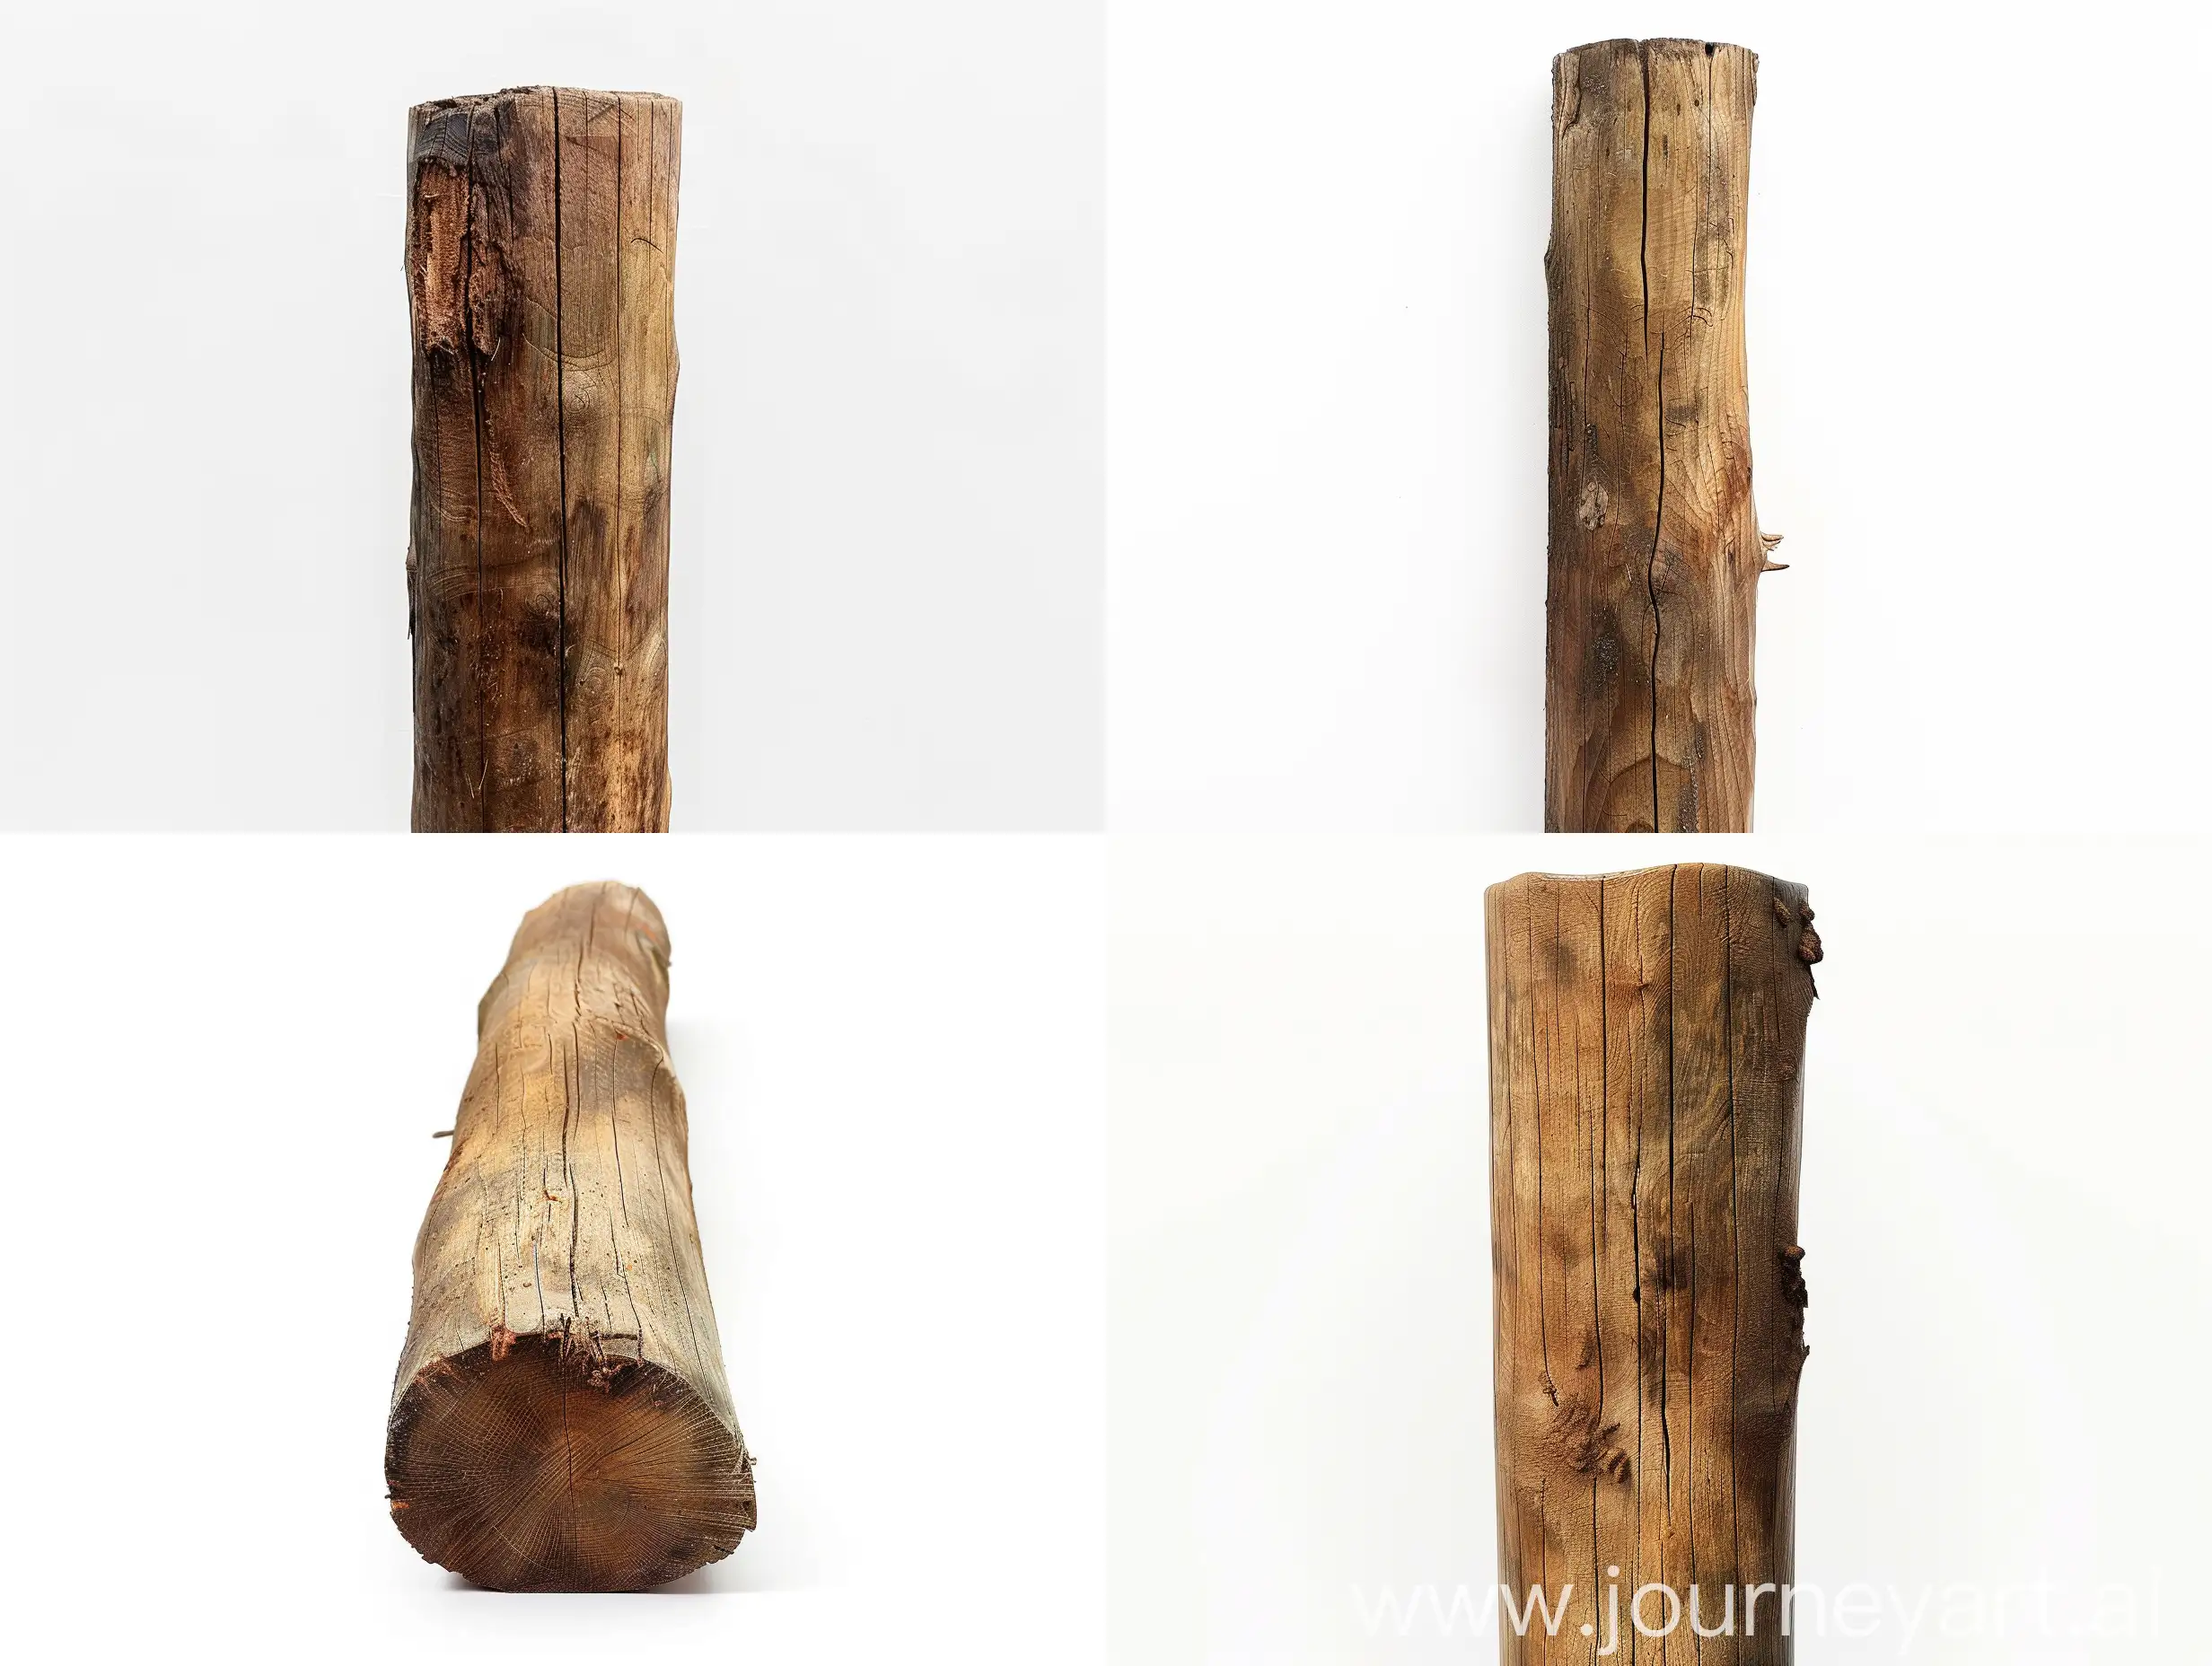 Wooden pole on white background, Alfa channel